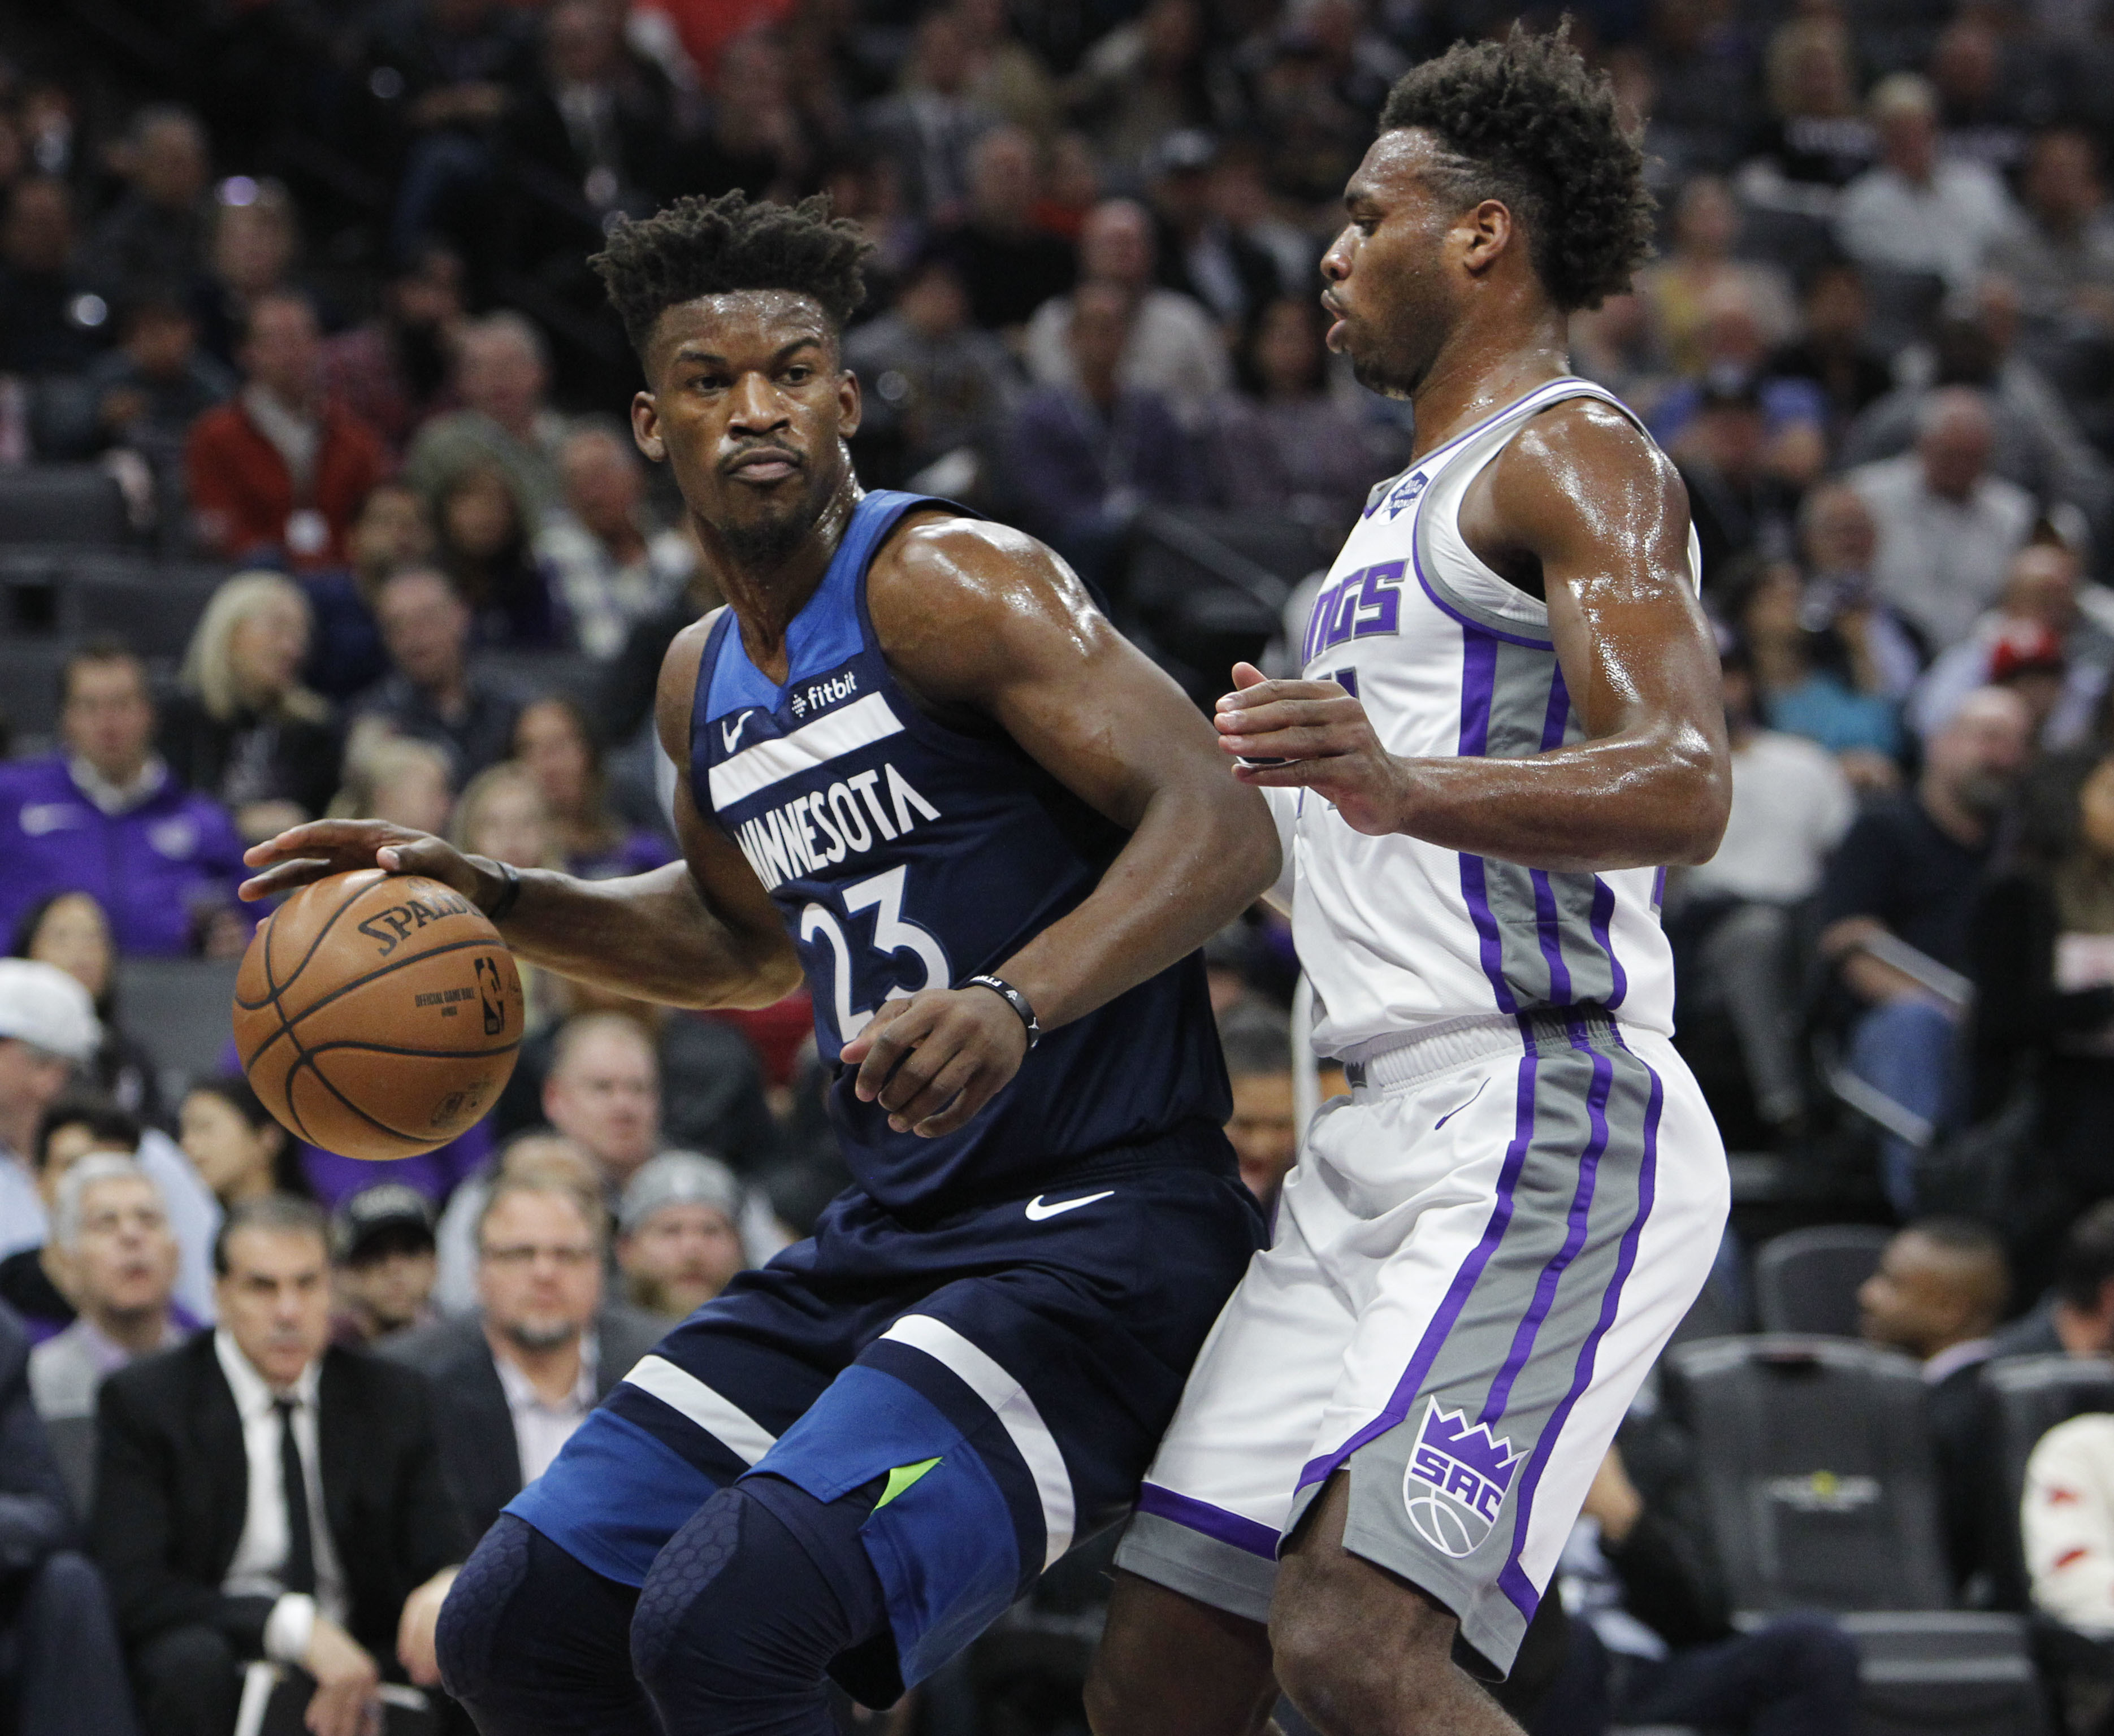 Kings come on strong late to beat Timberwolves 121-110